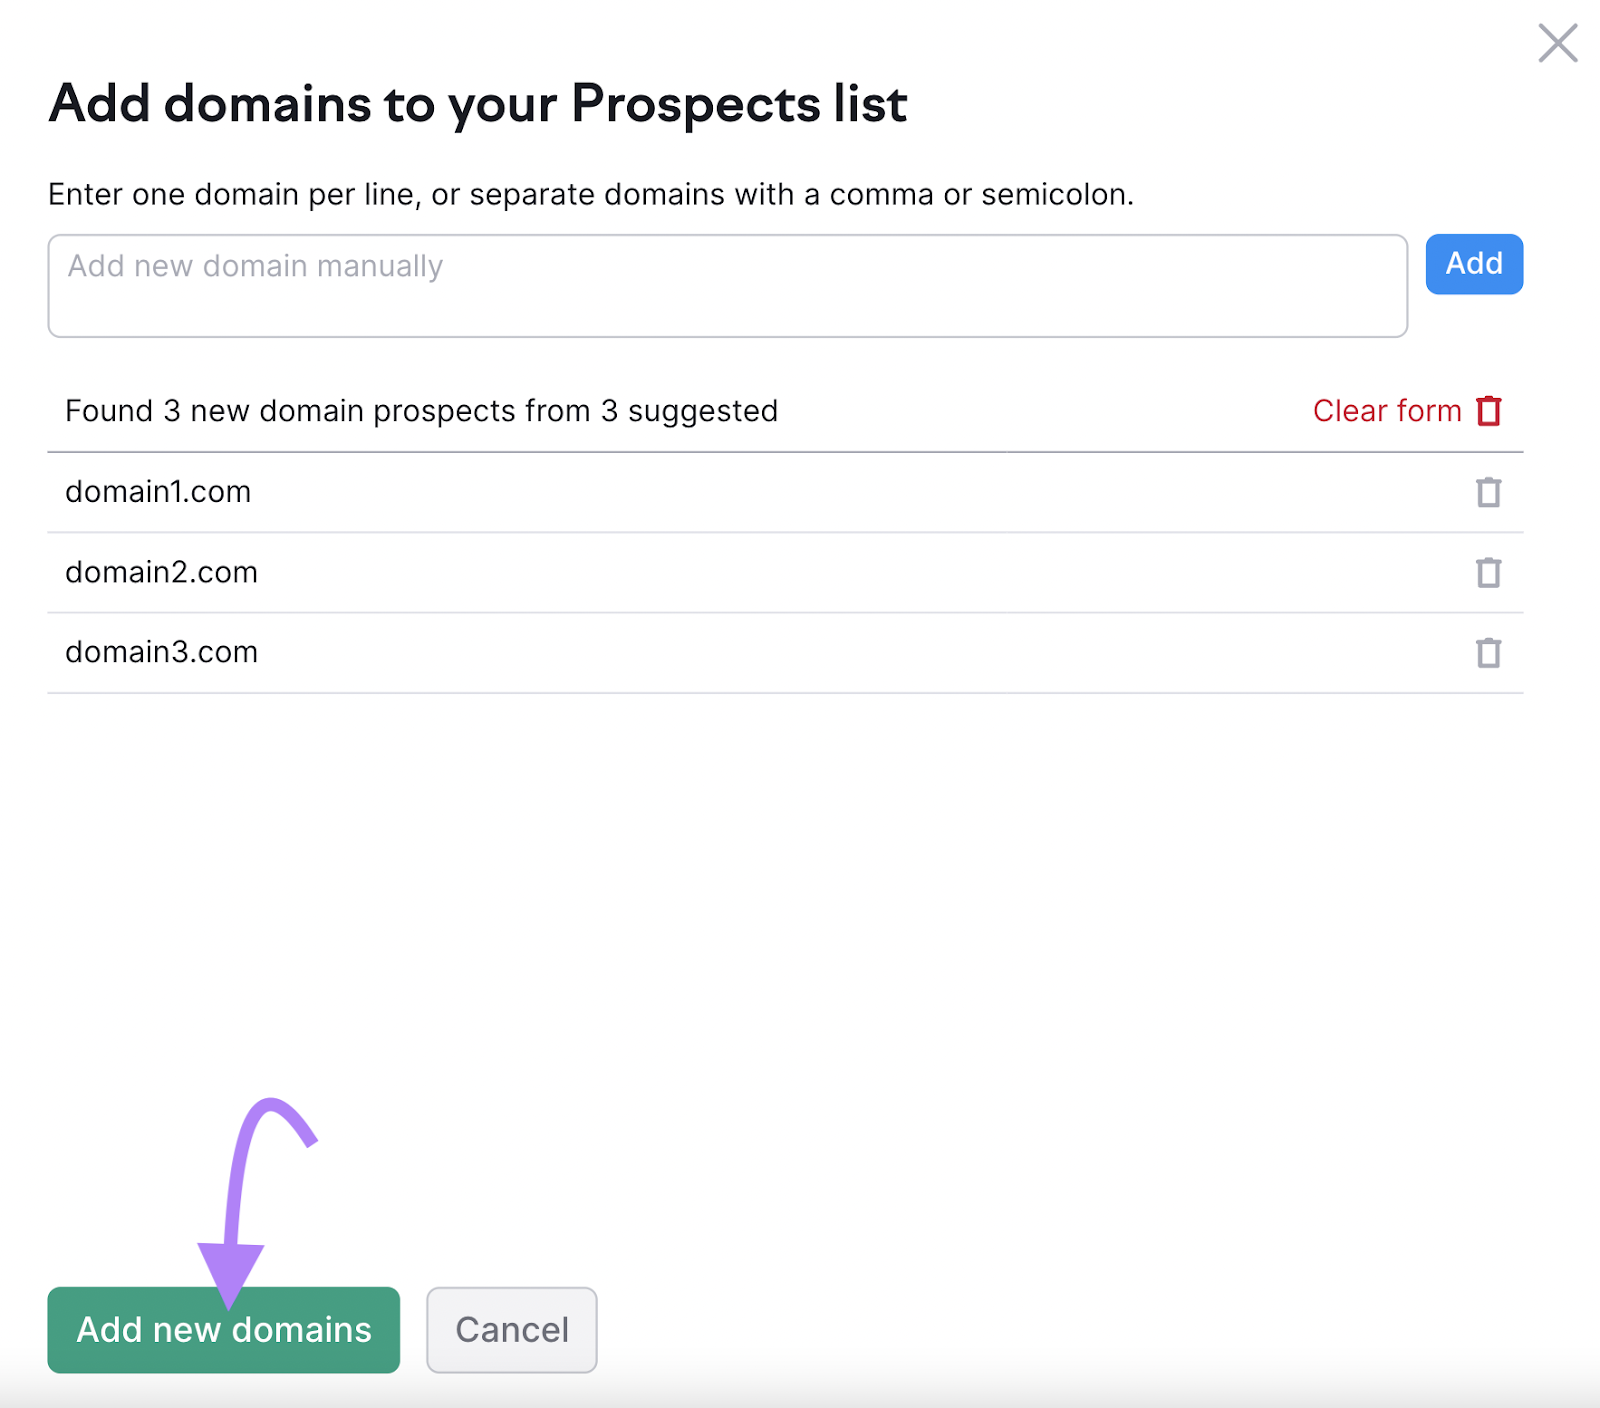 "Add domains to your Prospects list" window in Link Building Tool